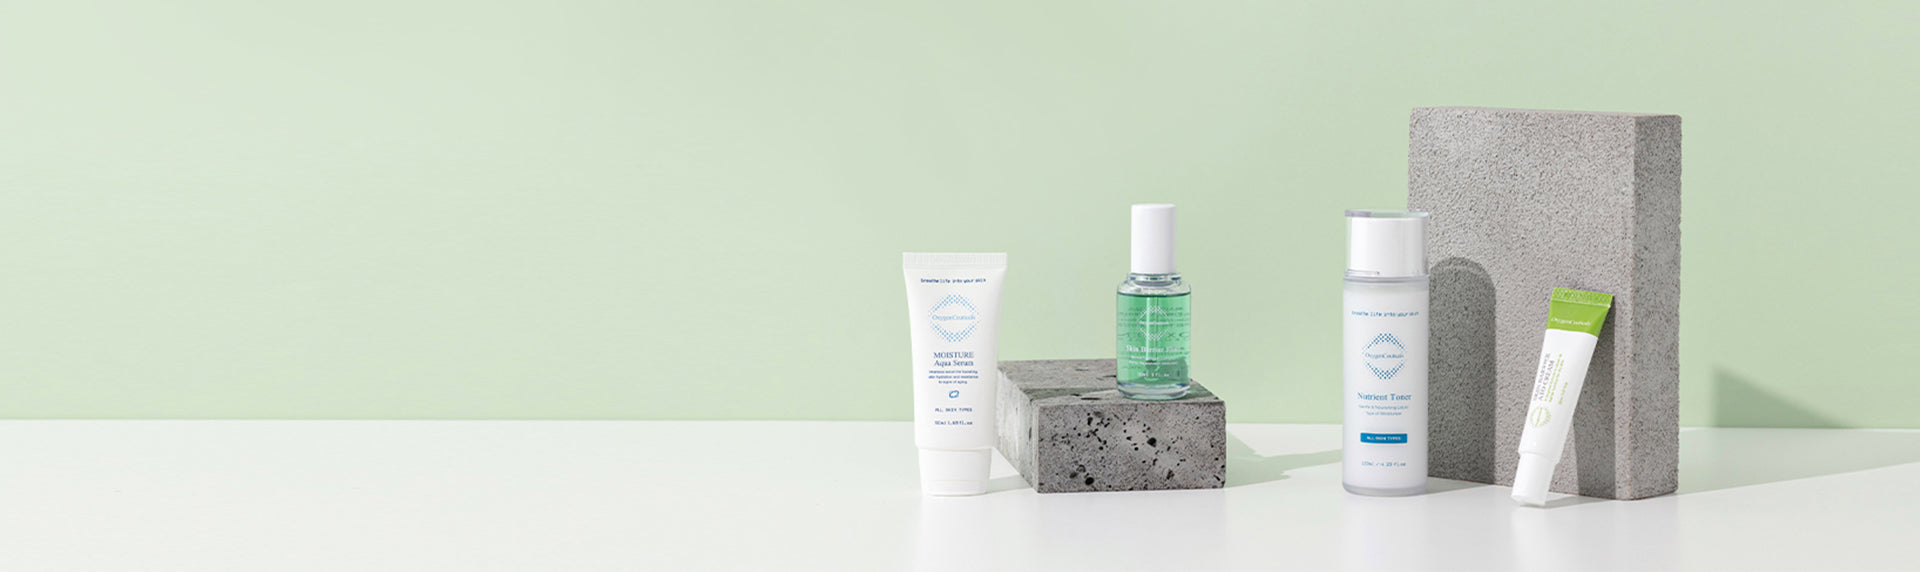 Best Korean skincare brand, OxygenCeuticals, showcasing their firming line on a soothing pale green backdrop.